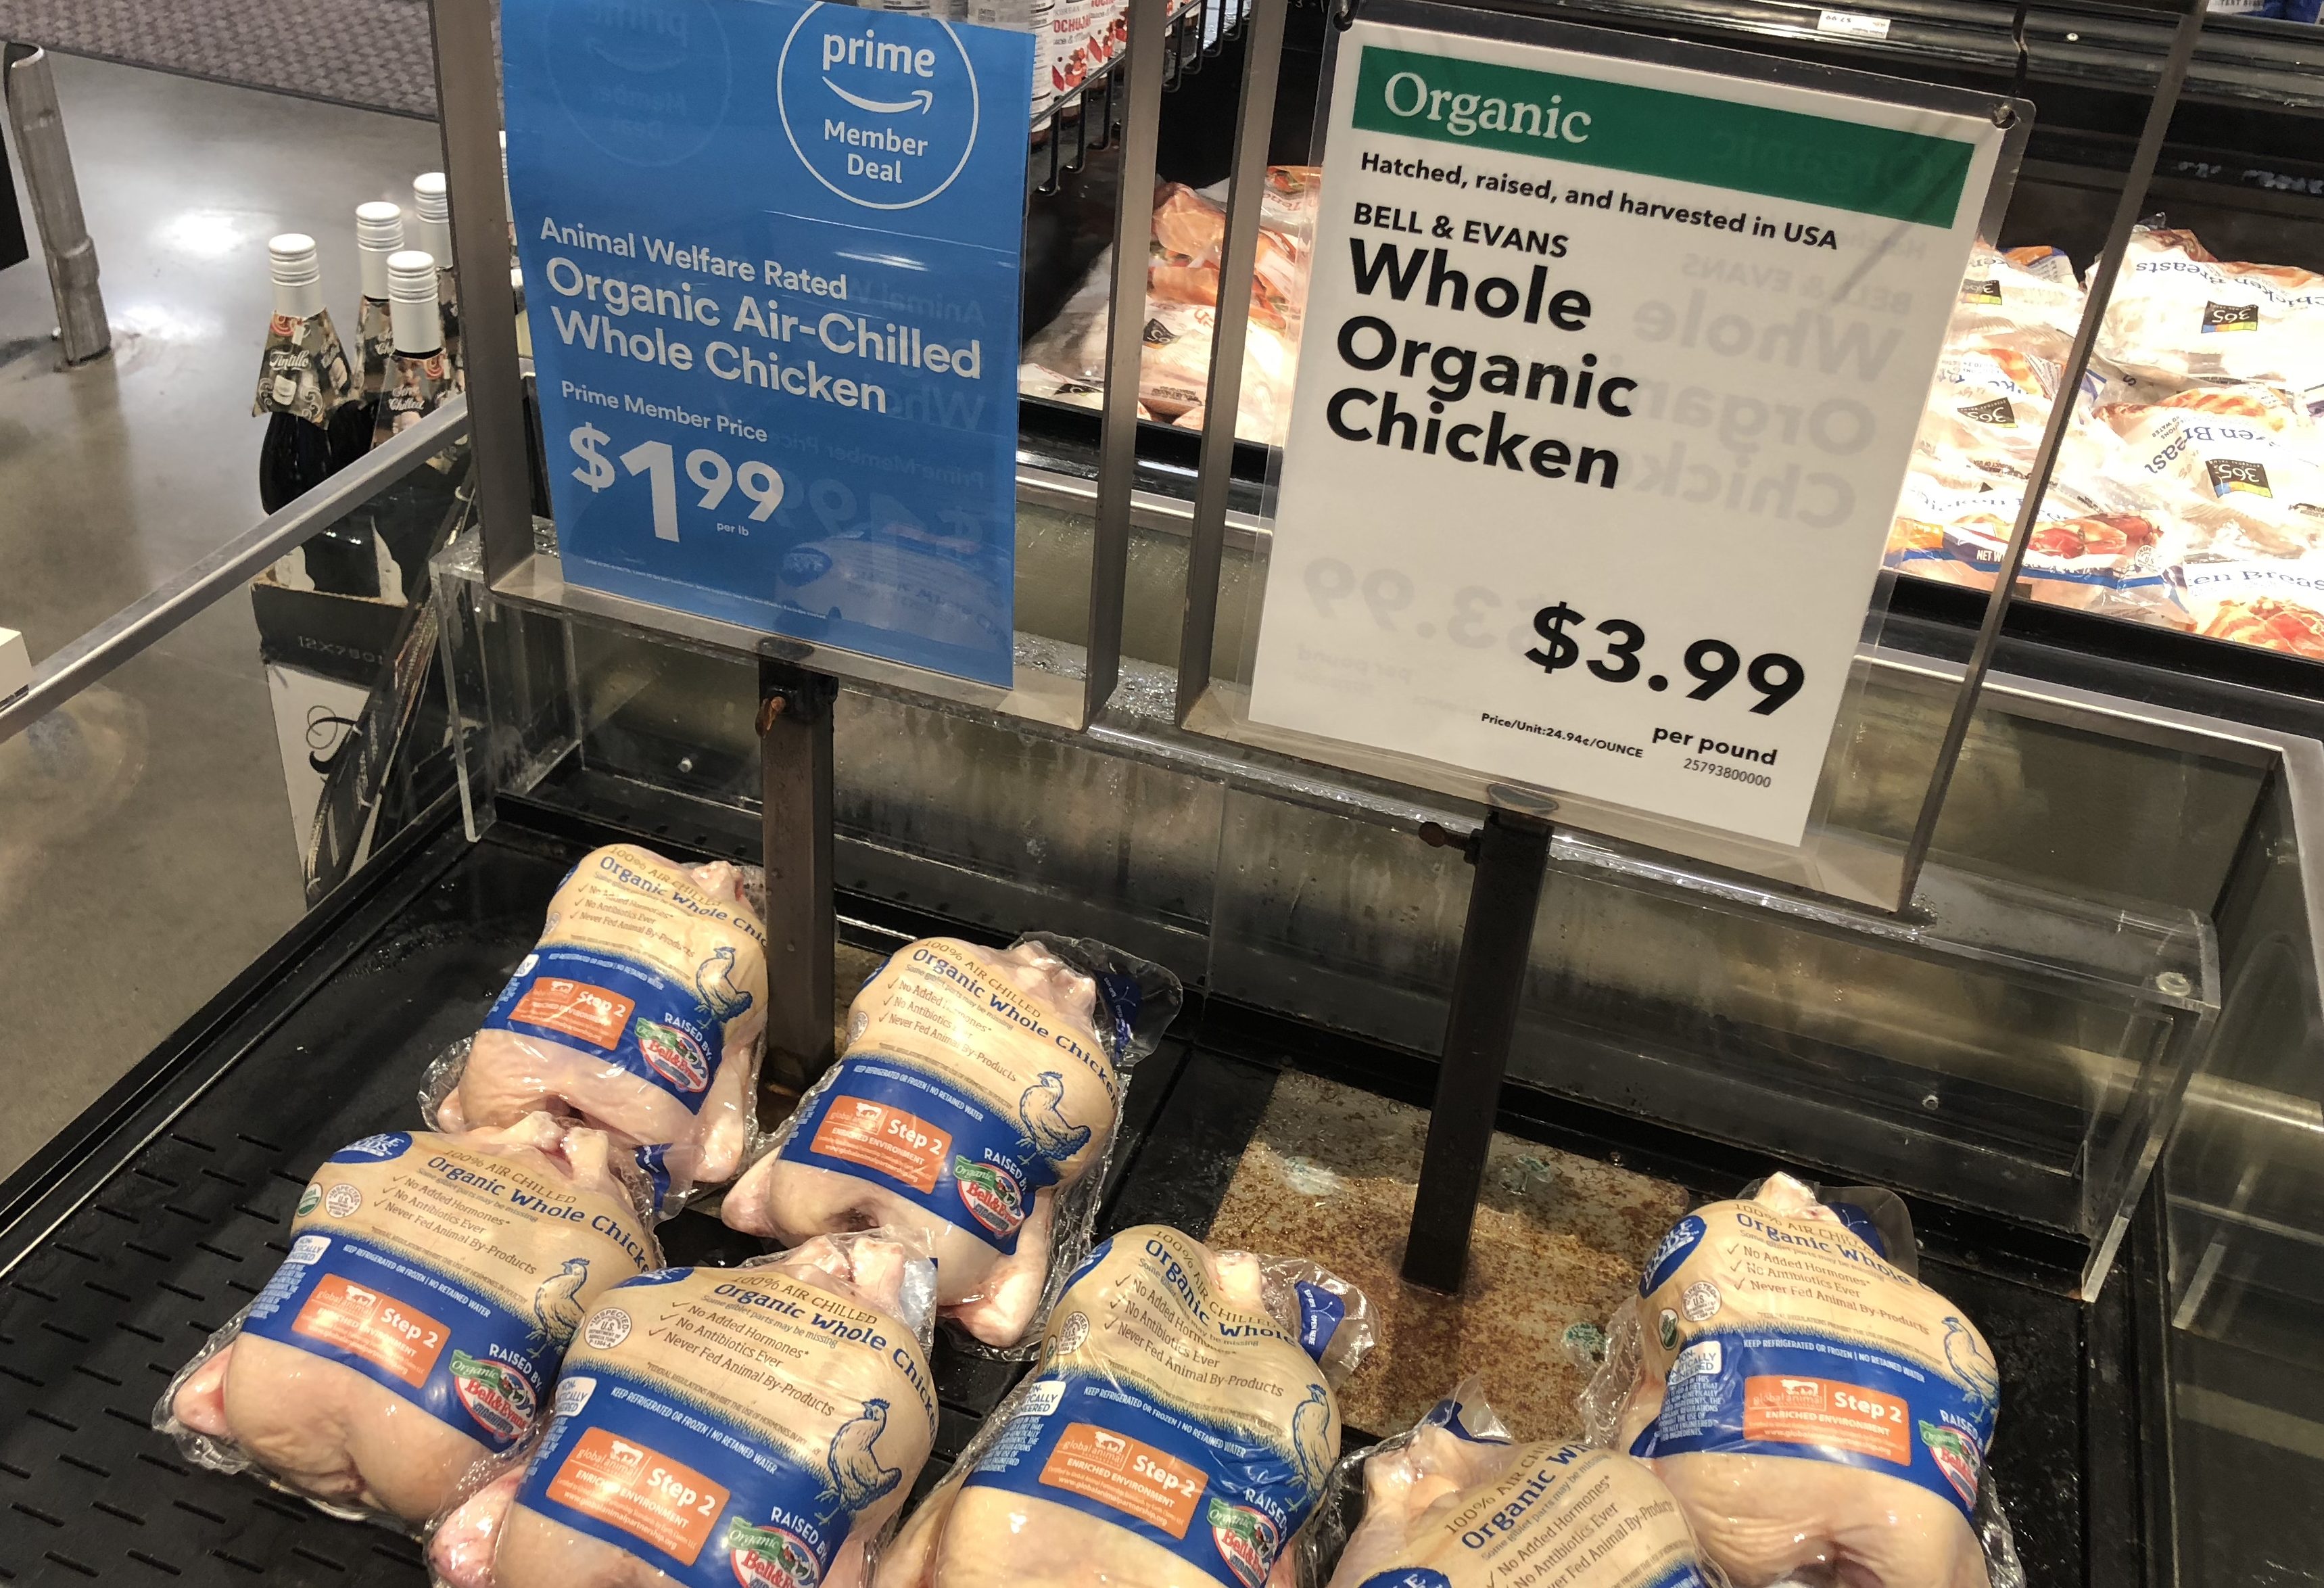 amazon prime sale whole foods - Whole Foods Chicken for Prime Members priced lower